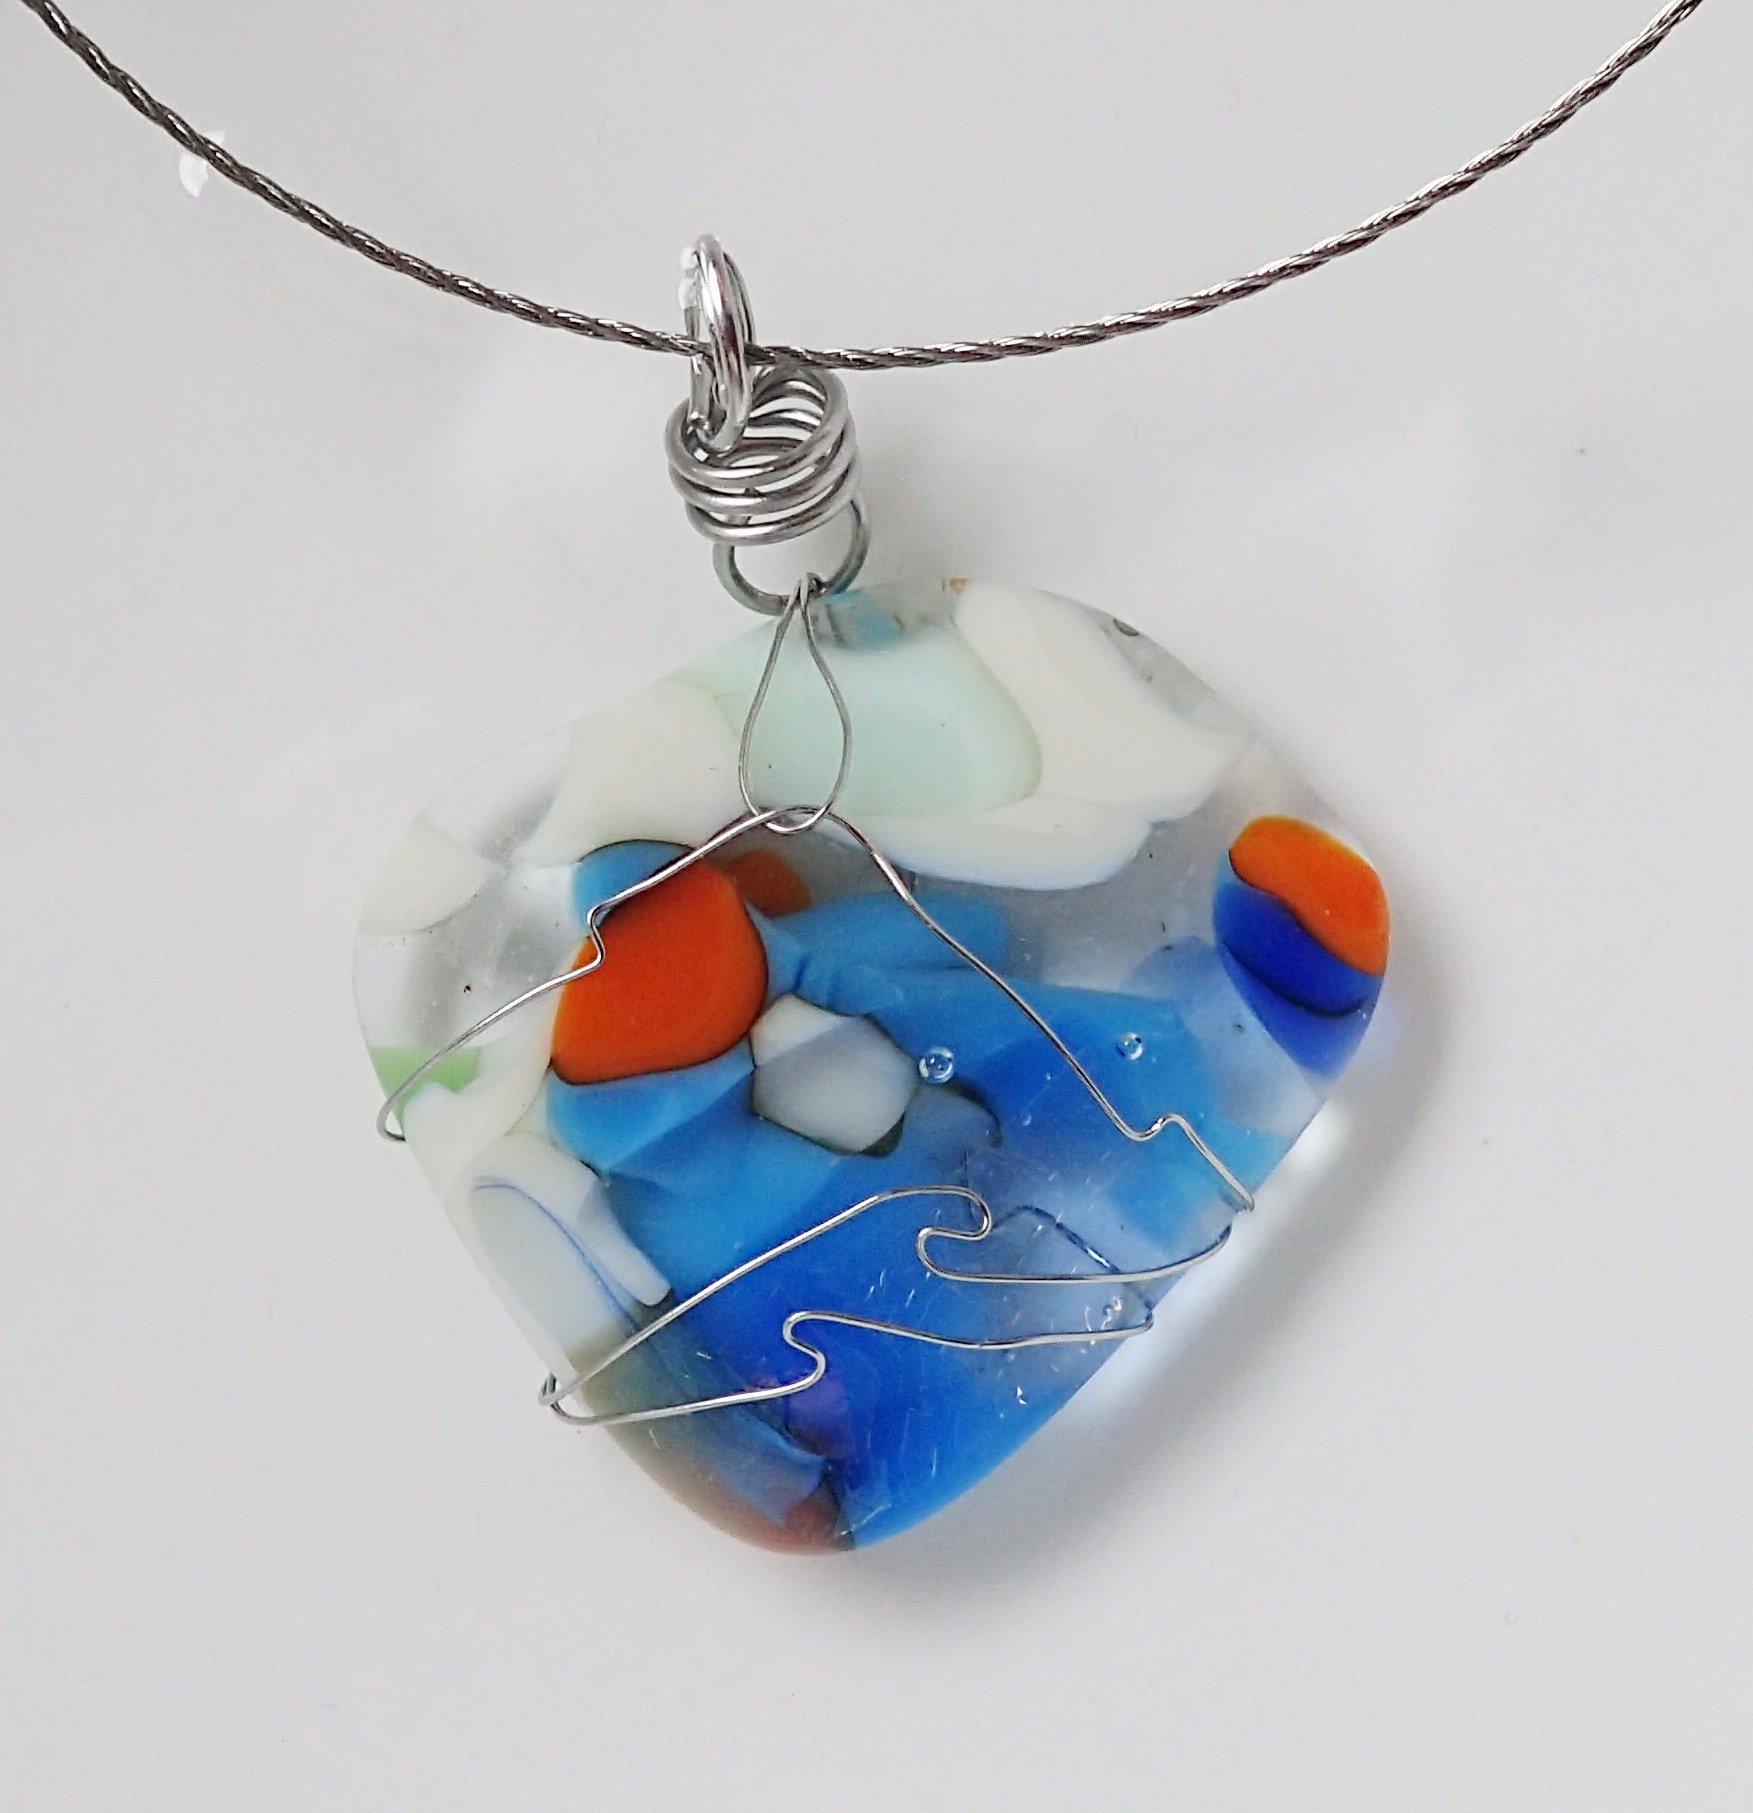 Fused Glass “Happy Stone” Pendants with a Stainless Steel Wire Finish